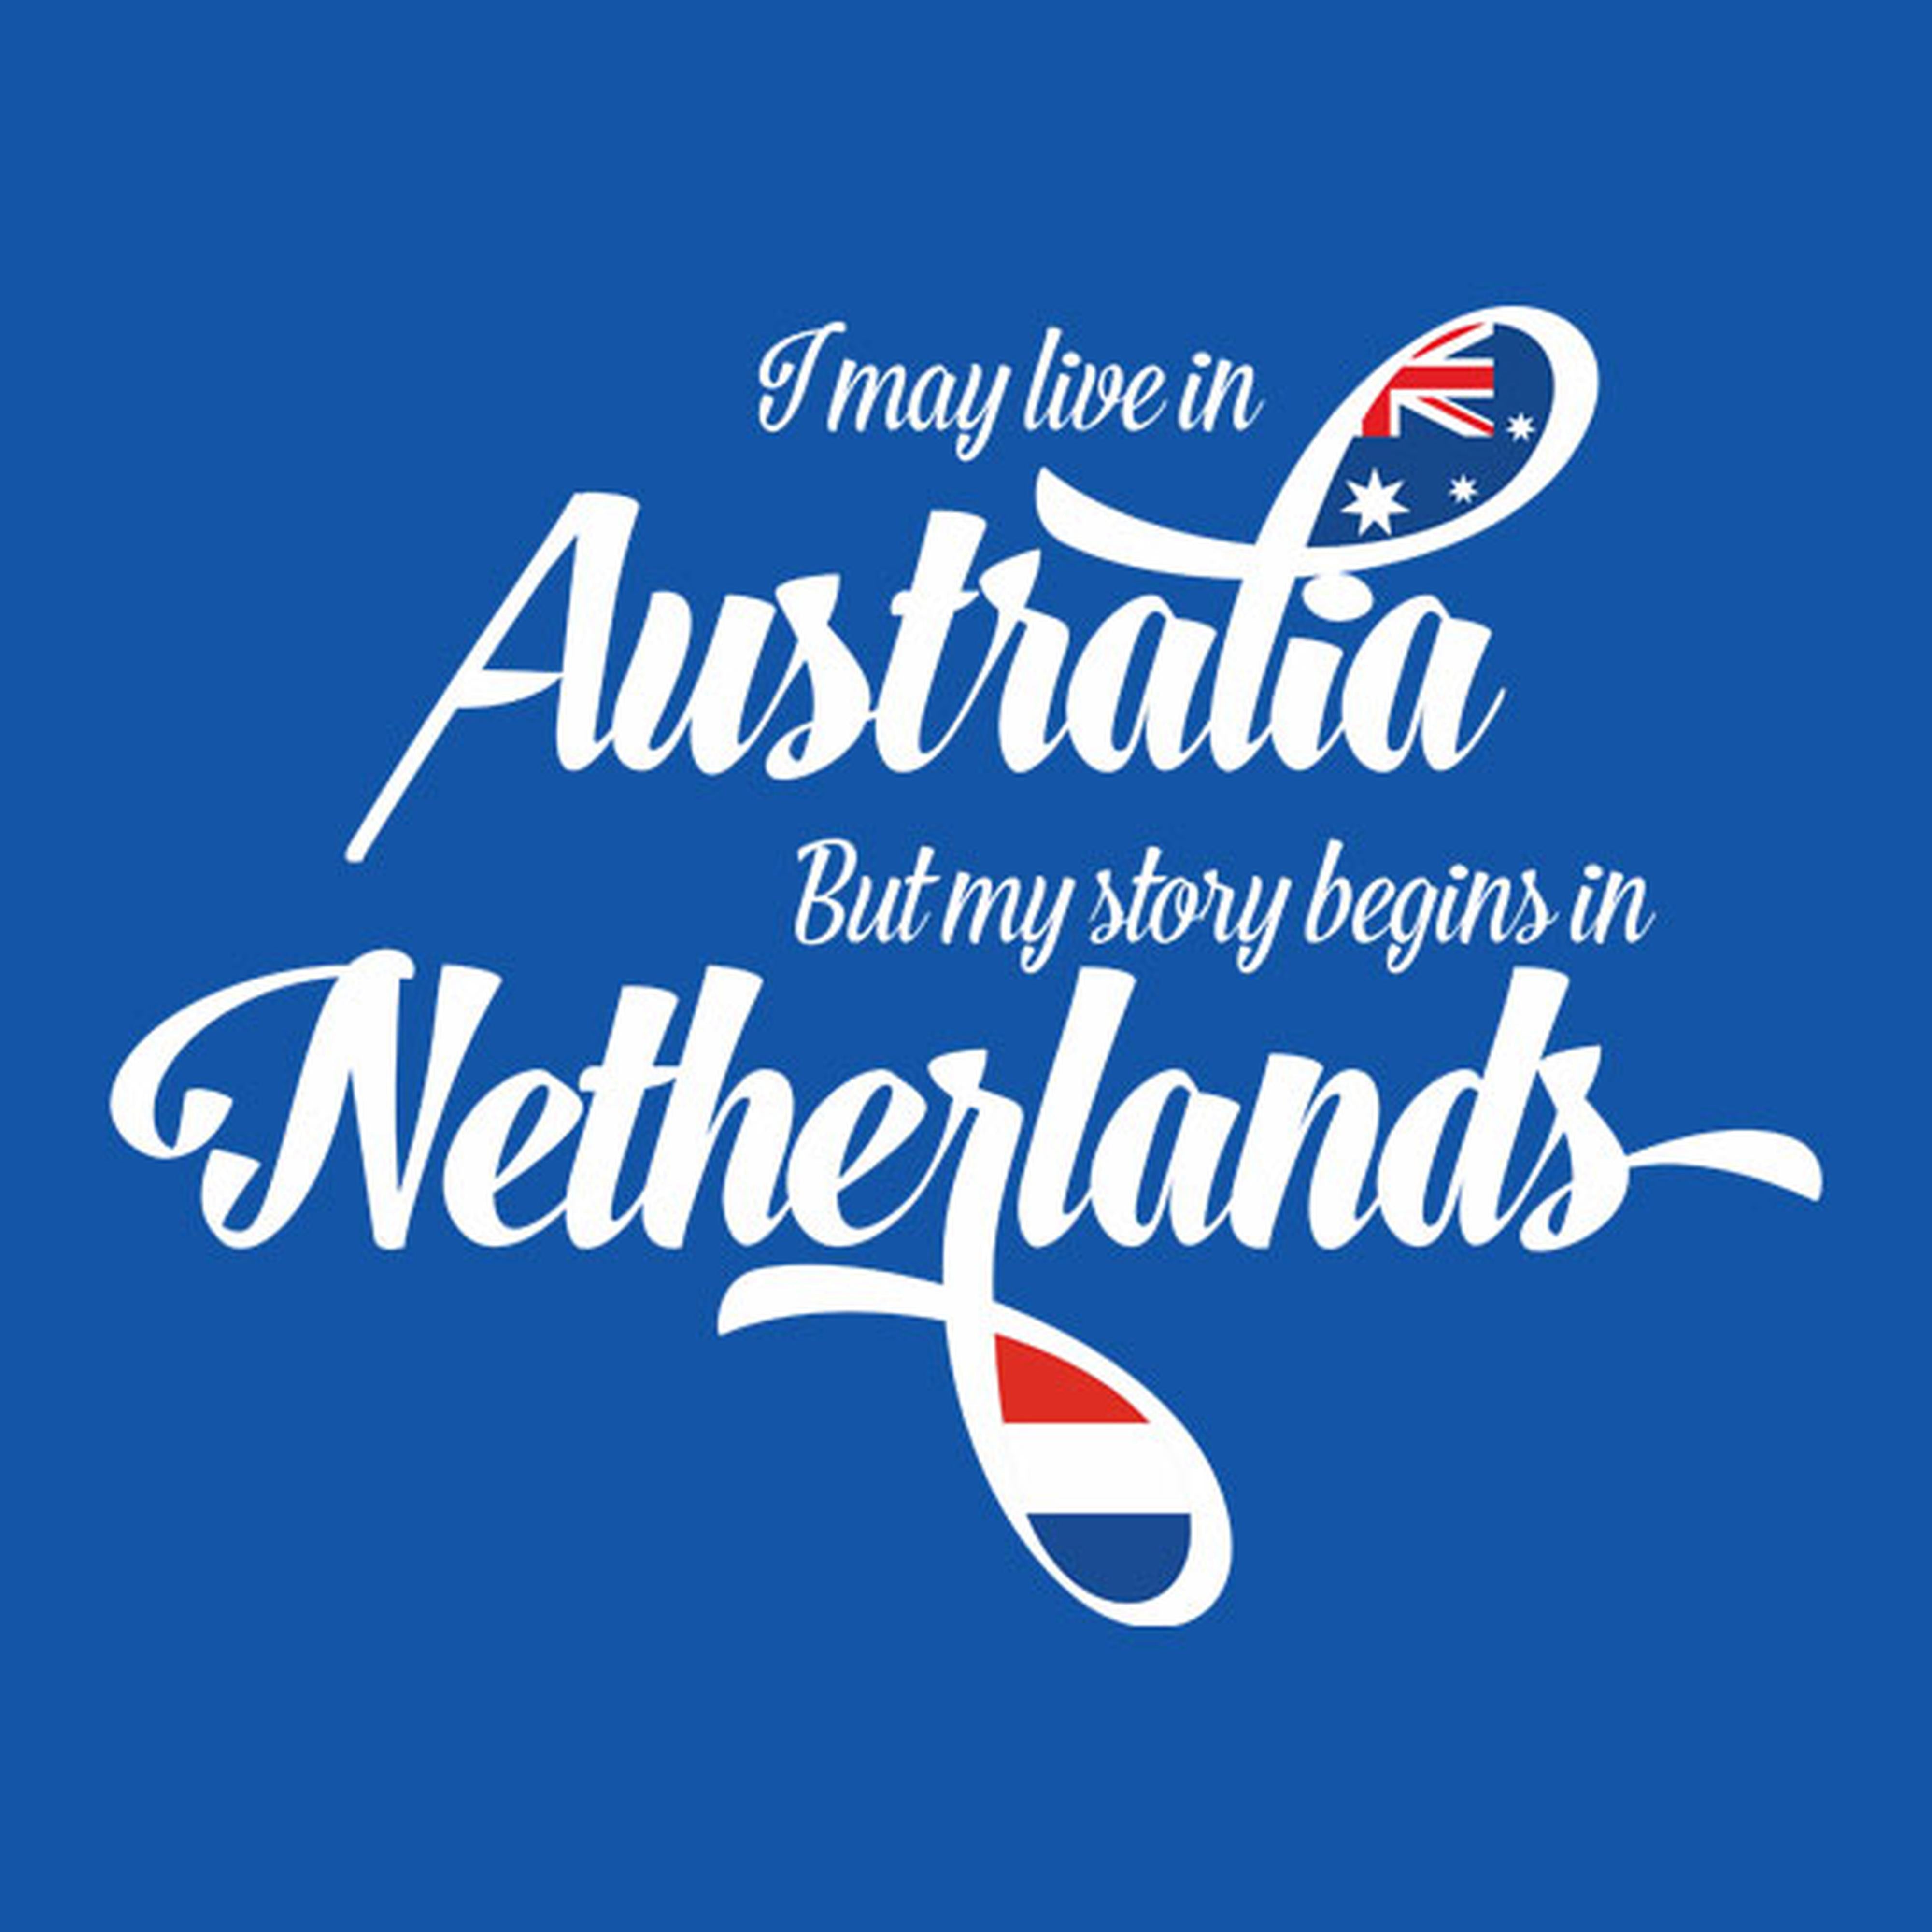 I may live in Australia but my story begins in Netherlands - T-shirt